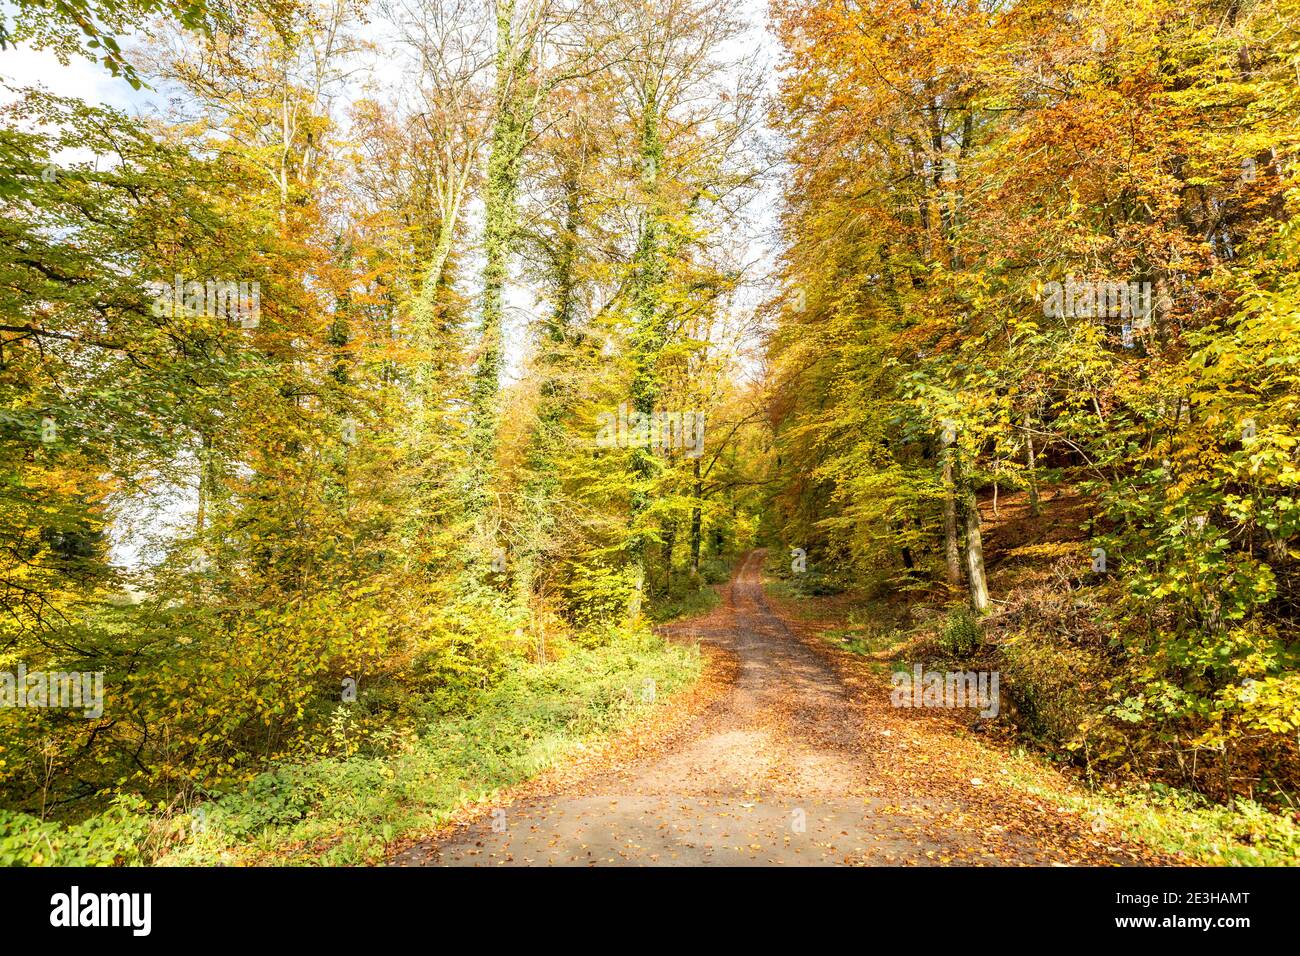 Autumn forests scene with country road Stock Photo